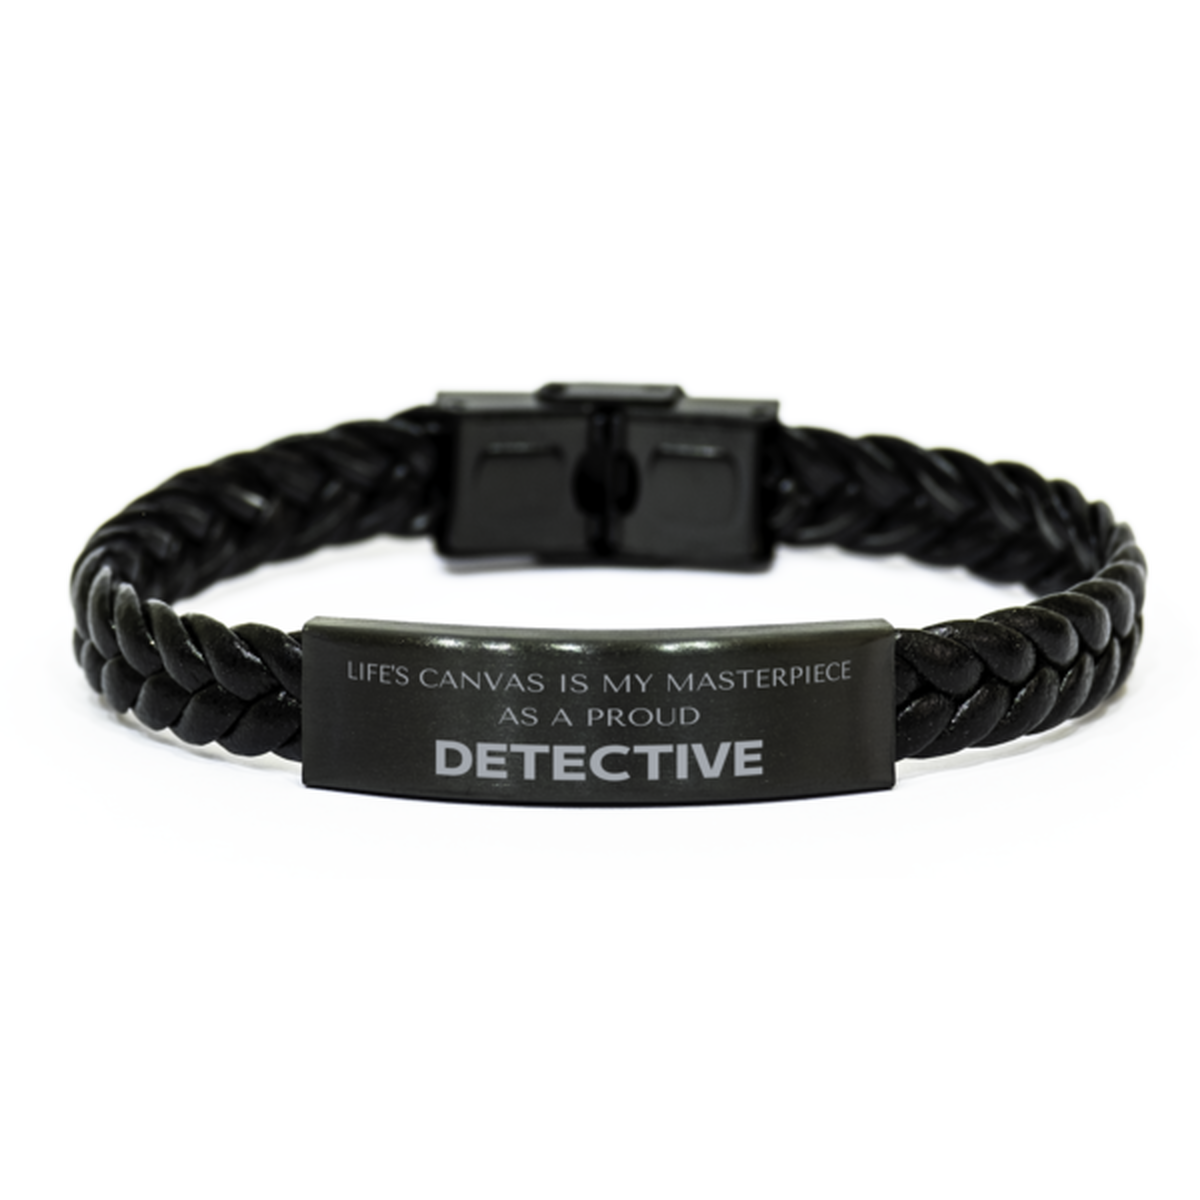 Proud Detective Gifts, Life's canvas is my masterpiece, Epic Birthday Christmas Unique Braided Leather Bracelet For Detective, Coworkers, Men, Women, Friends